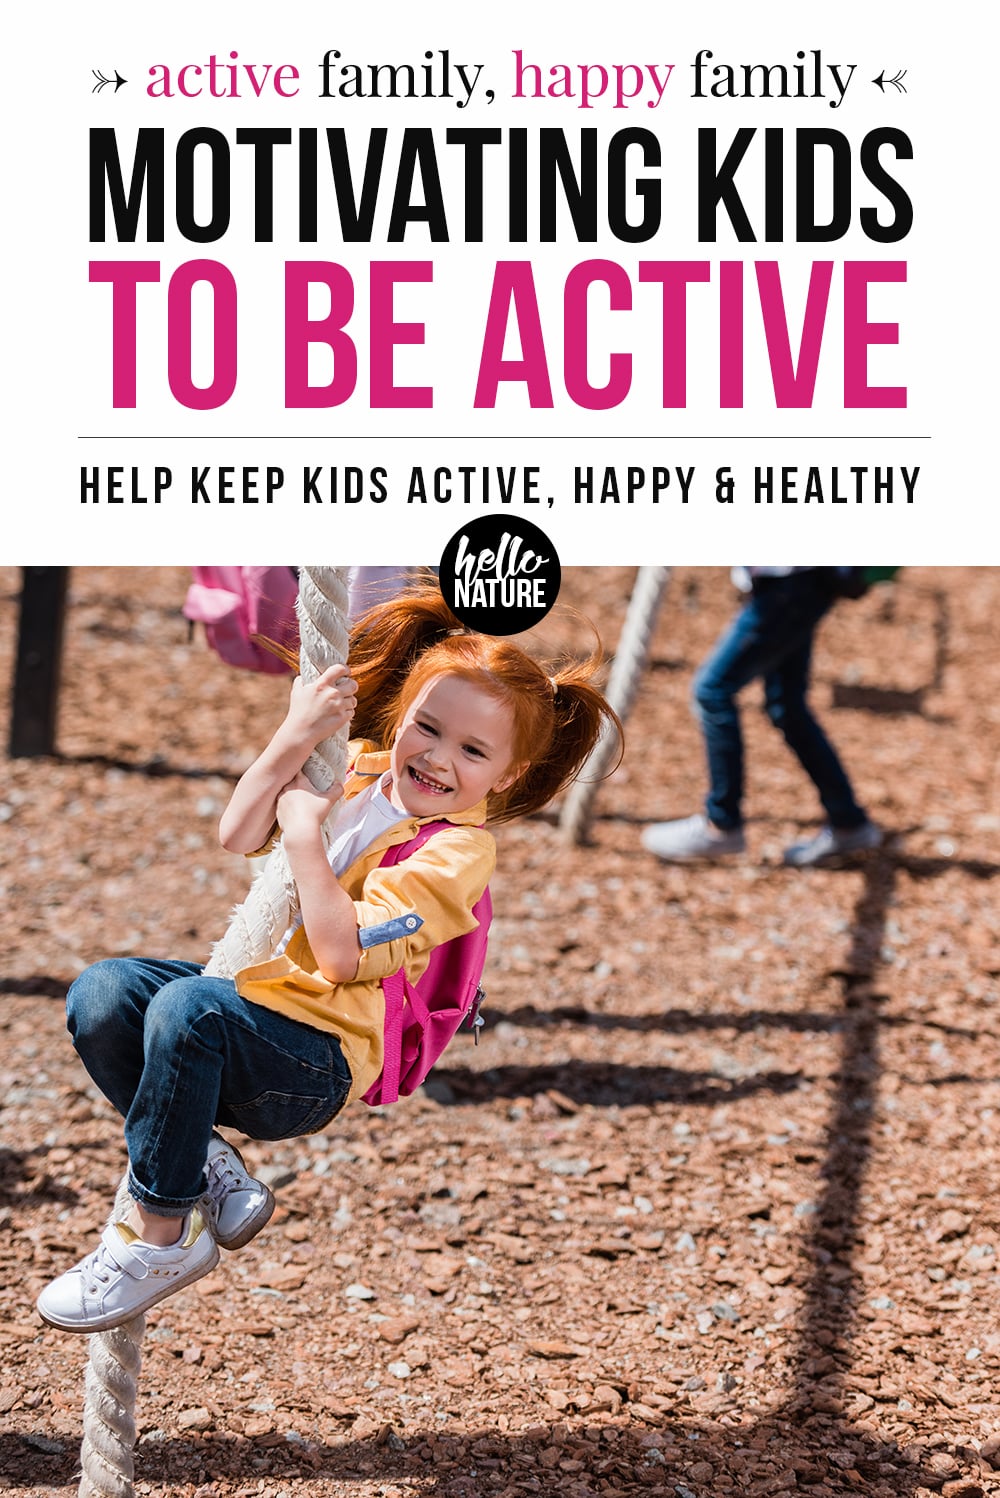 Motivating kids to be active doesn't have to be hard. Learn how easy it can be to get your children (and entire family) moving so you can become an active family together.